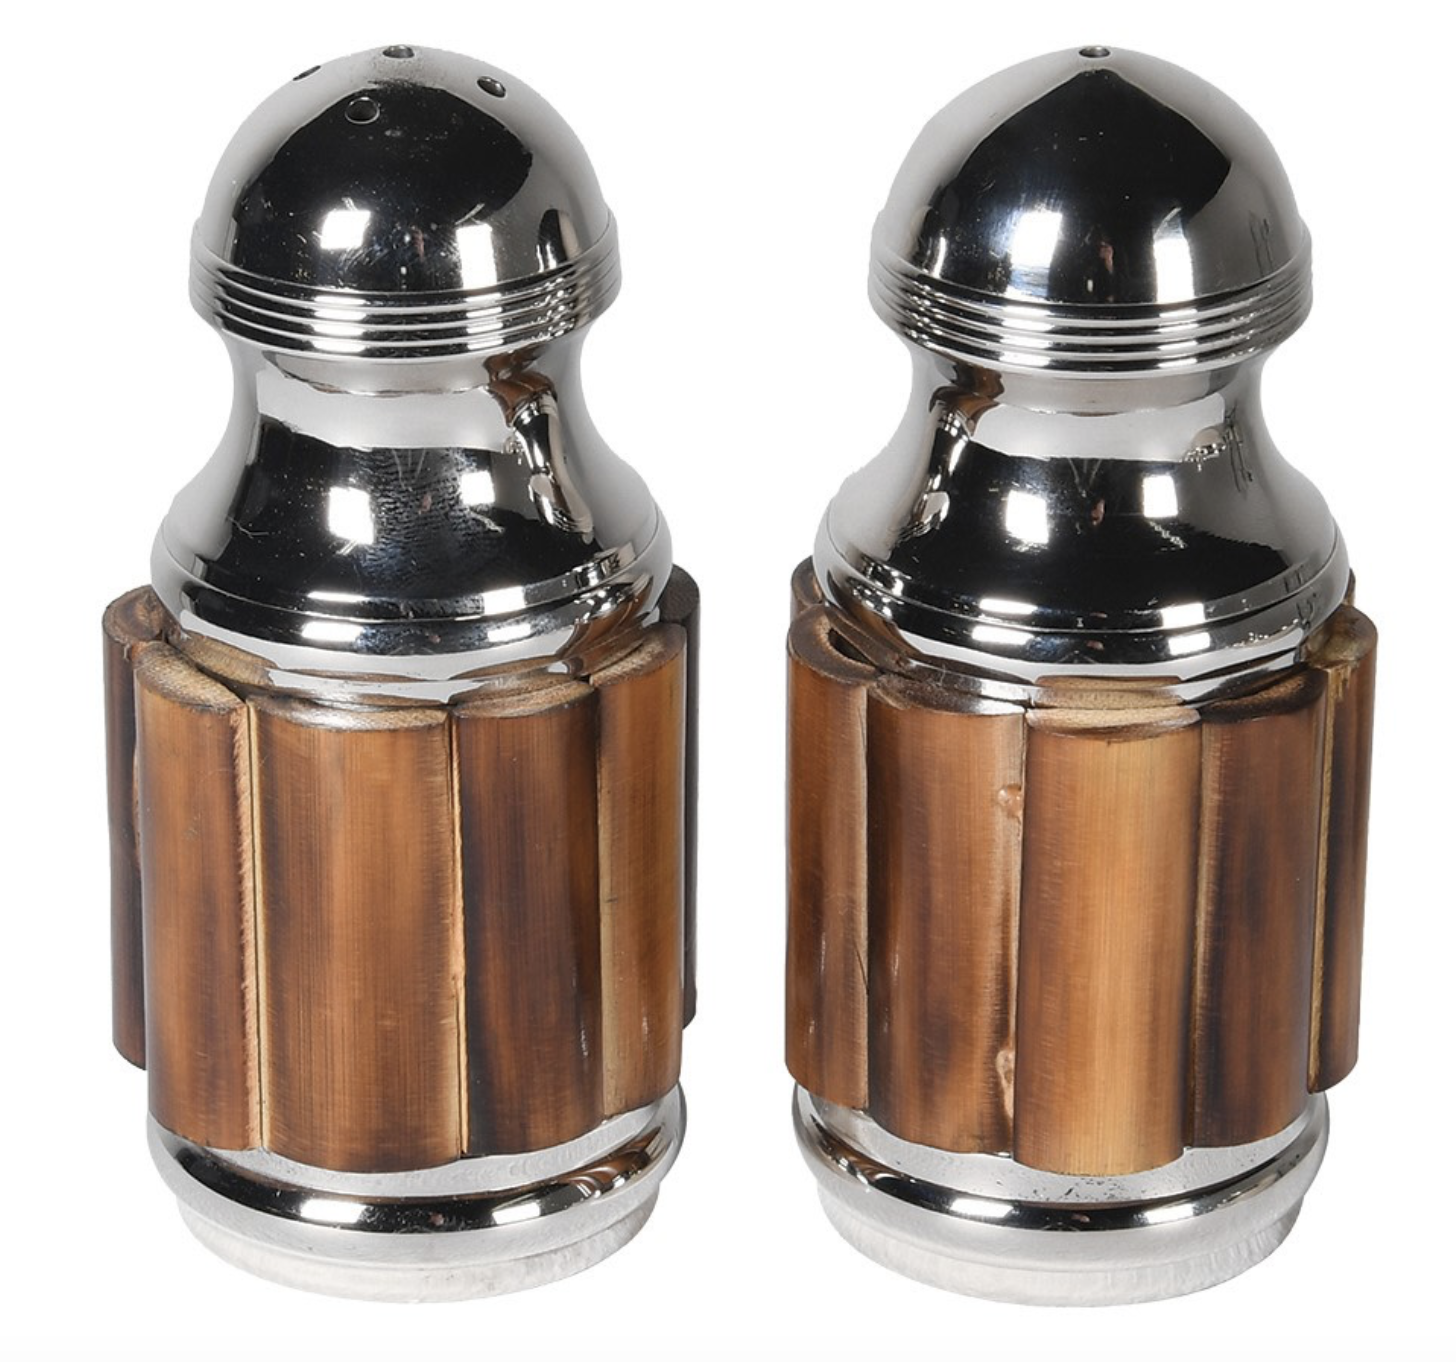 THE BROWNHOUSE INTERIORS Bamboo Salt and Pepper Set